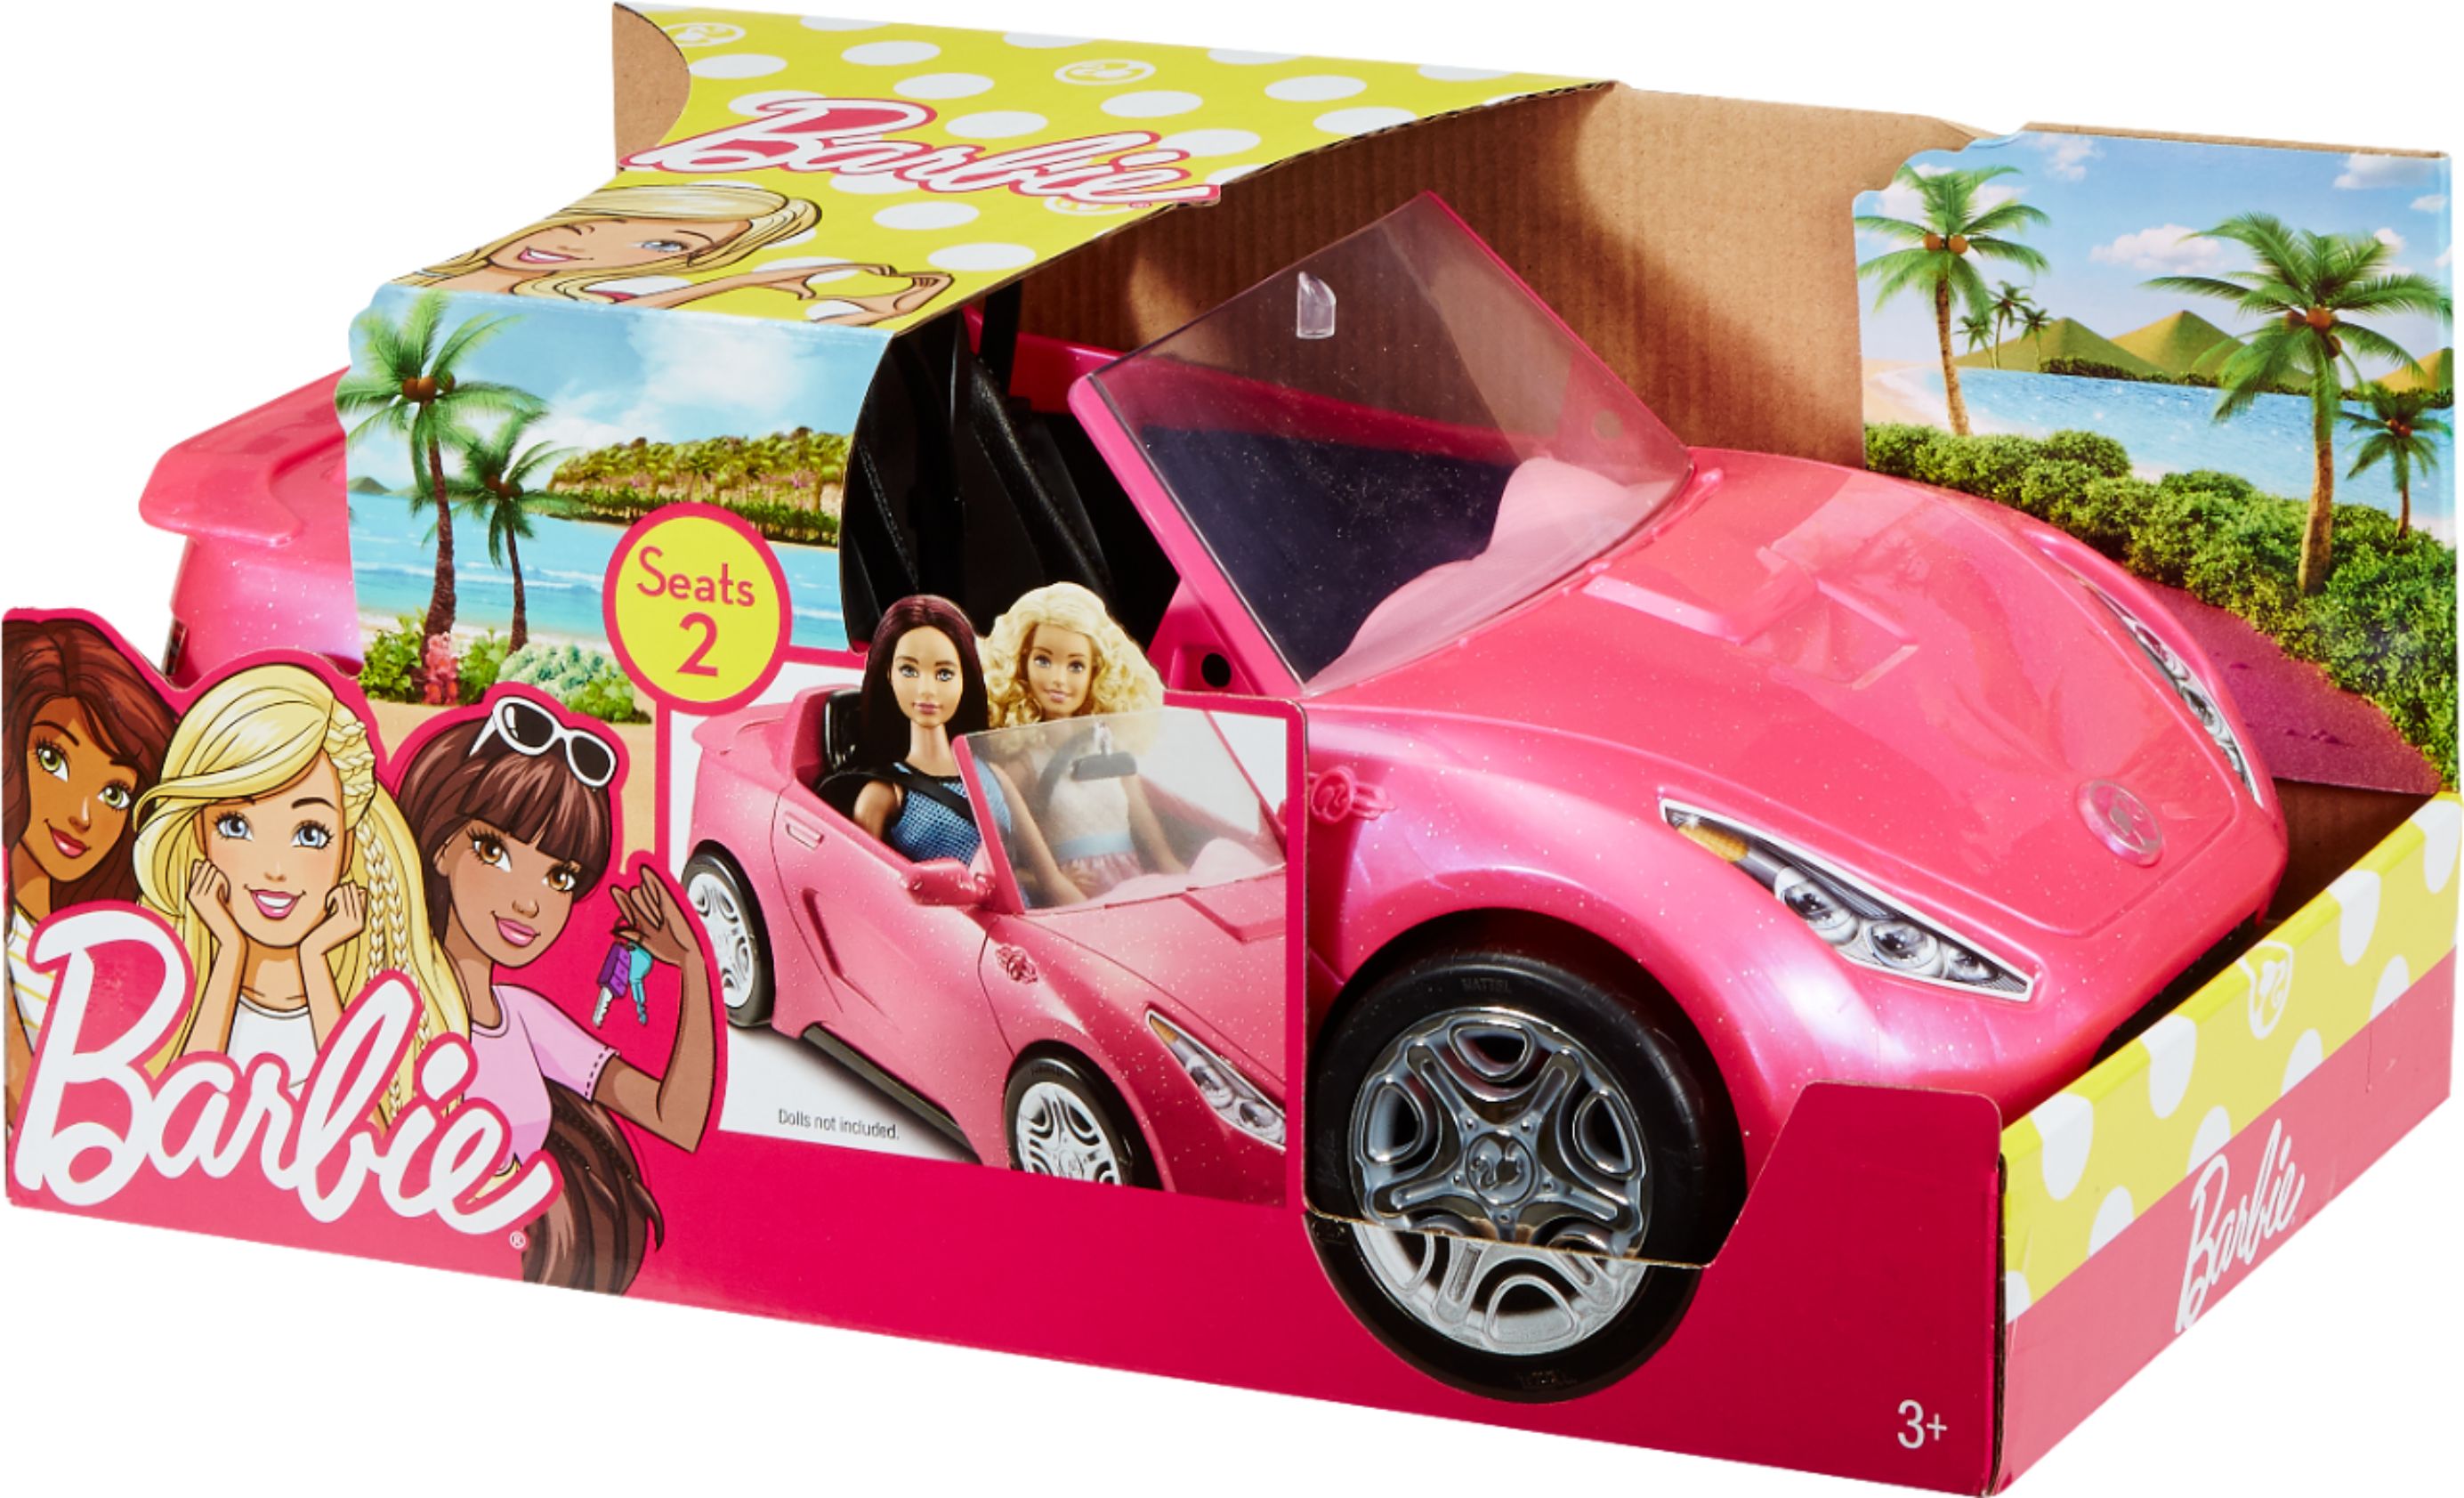 Toy Vehicle for Doll Pink Car Barbie FXG57 Malibu House Playset and DVX59 Autre Glam Convertible Sports